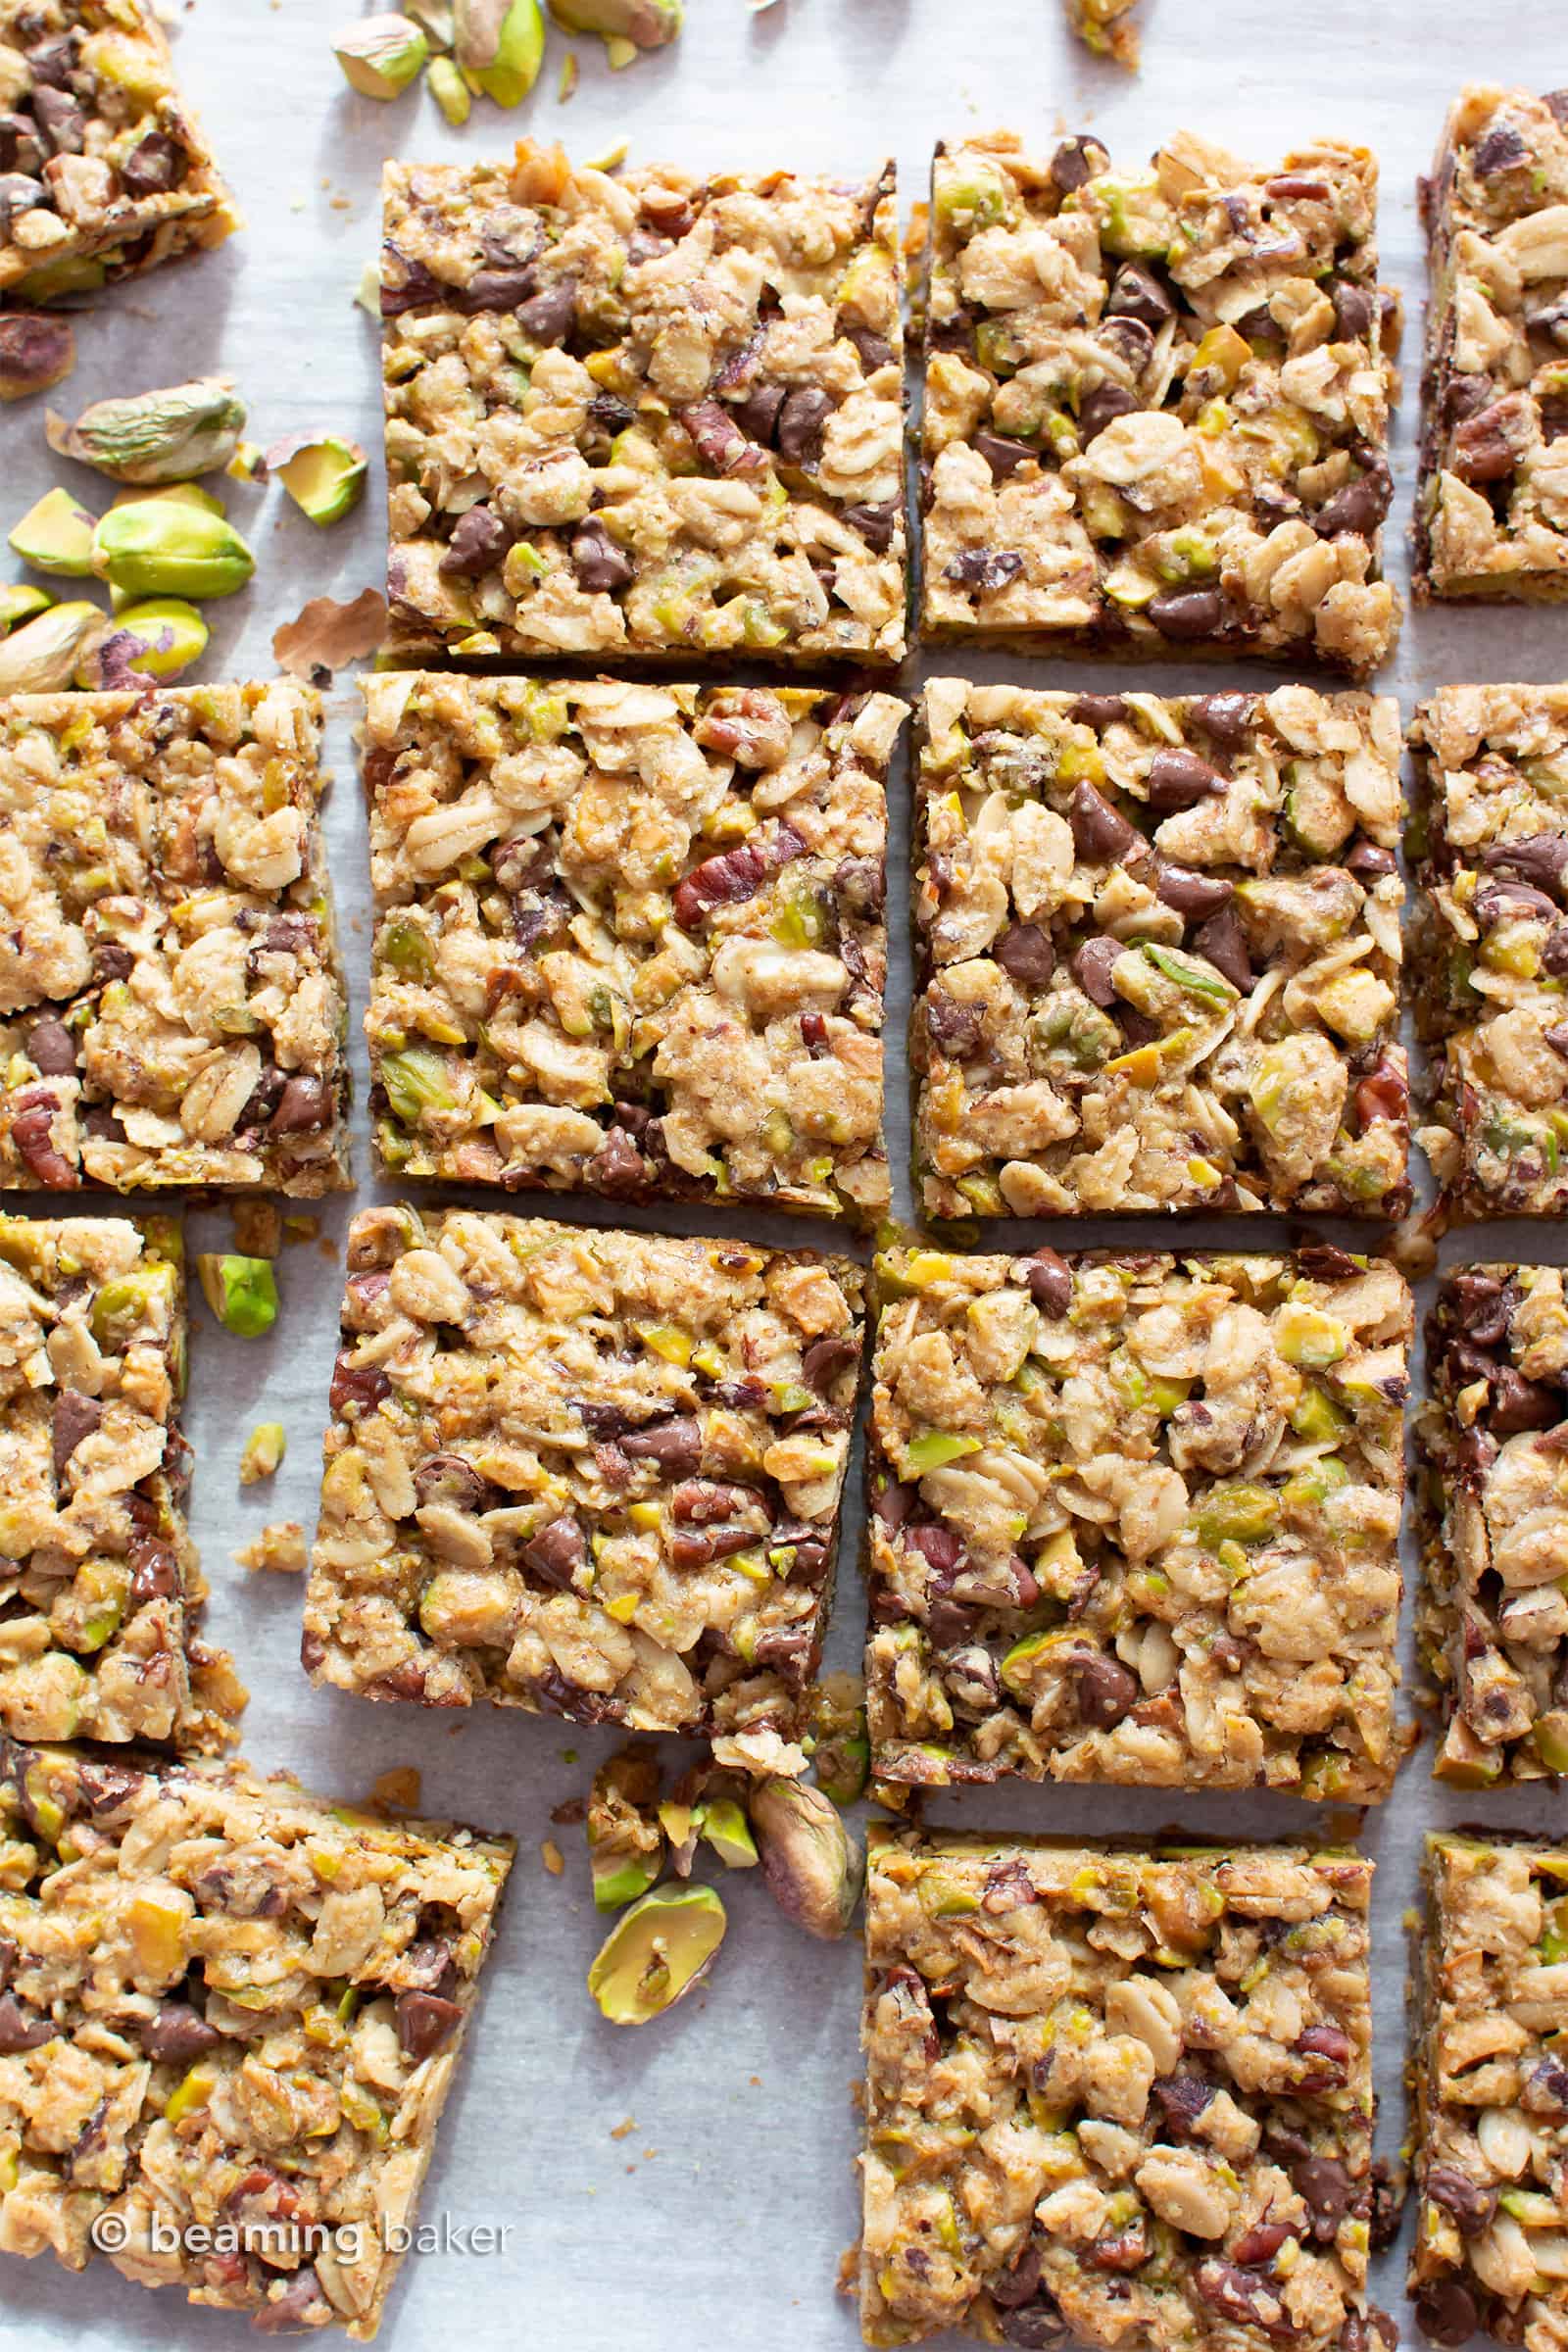 Chocolate Pistachio Healthy Vegan Snack Bars (GF): soft & chewy Gluten Free Vegan snack bars packed with chocolate & pistachios! The perfect nutty snack—easy to make, simple ingredients for the BEST vegan snack bars! Dairy-Free, Refined Sugar-Free. #Snacks #Vegan #GlutenFree #HealthySnacks | Recipe at BeamingBaker.com